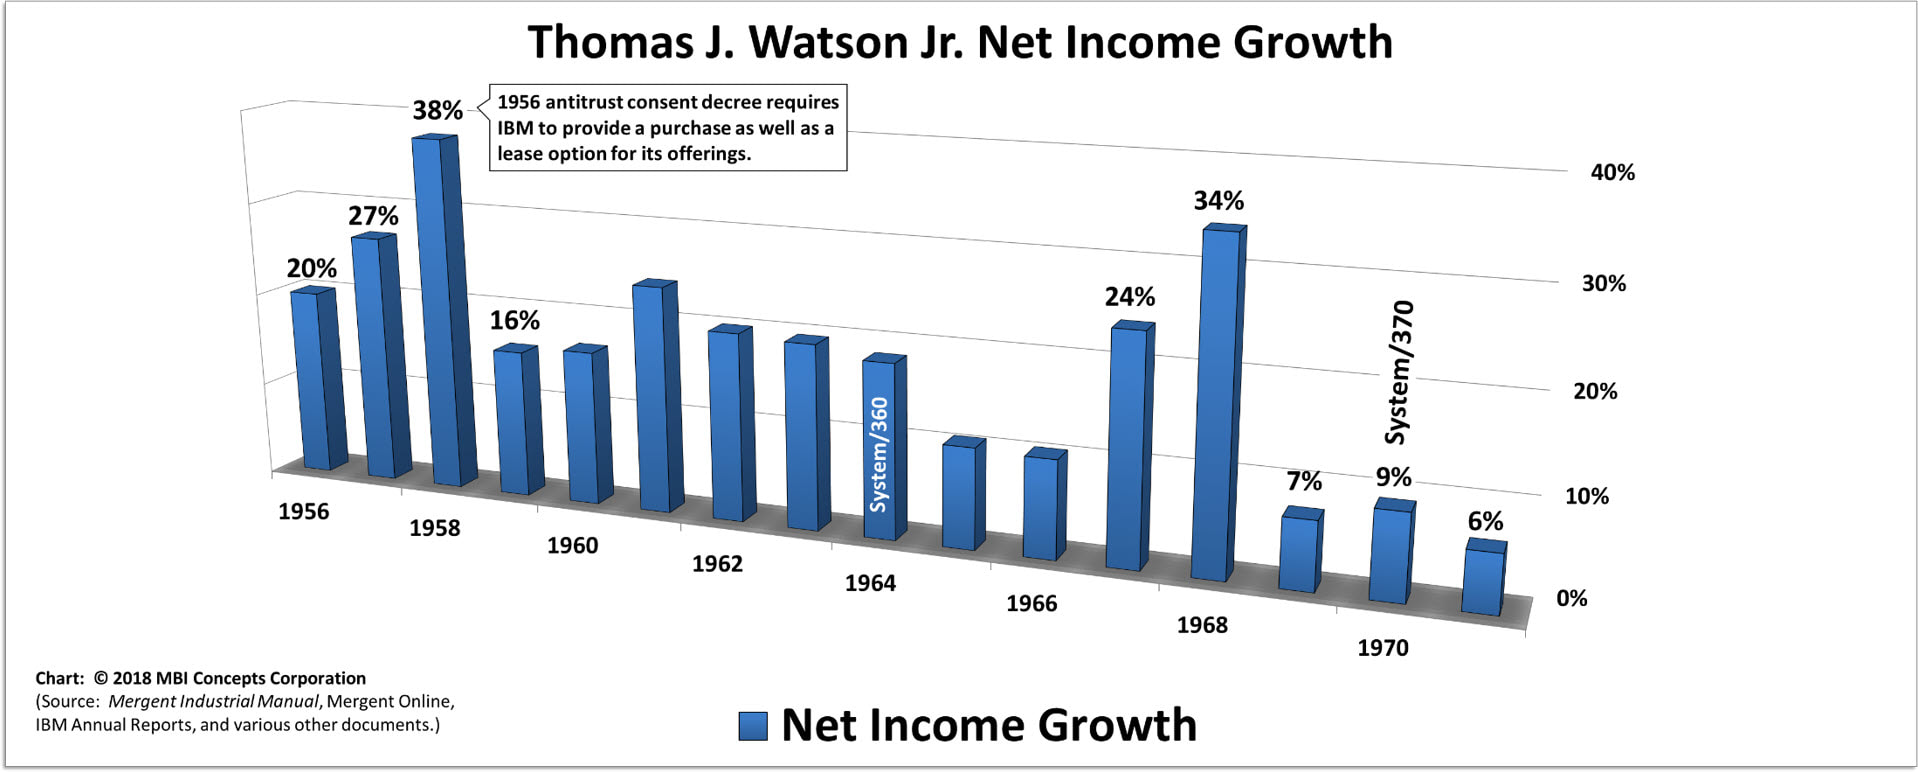 A color bar chart showing IBM's net income (profit) growth from 1956 to 1971 for Thomas J. Watson Jr.